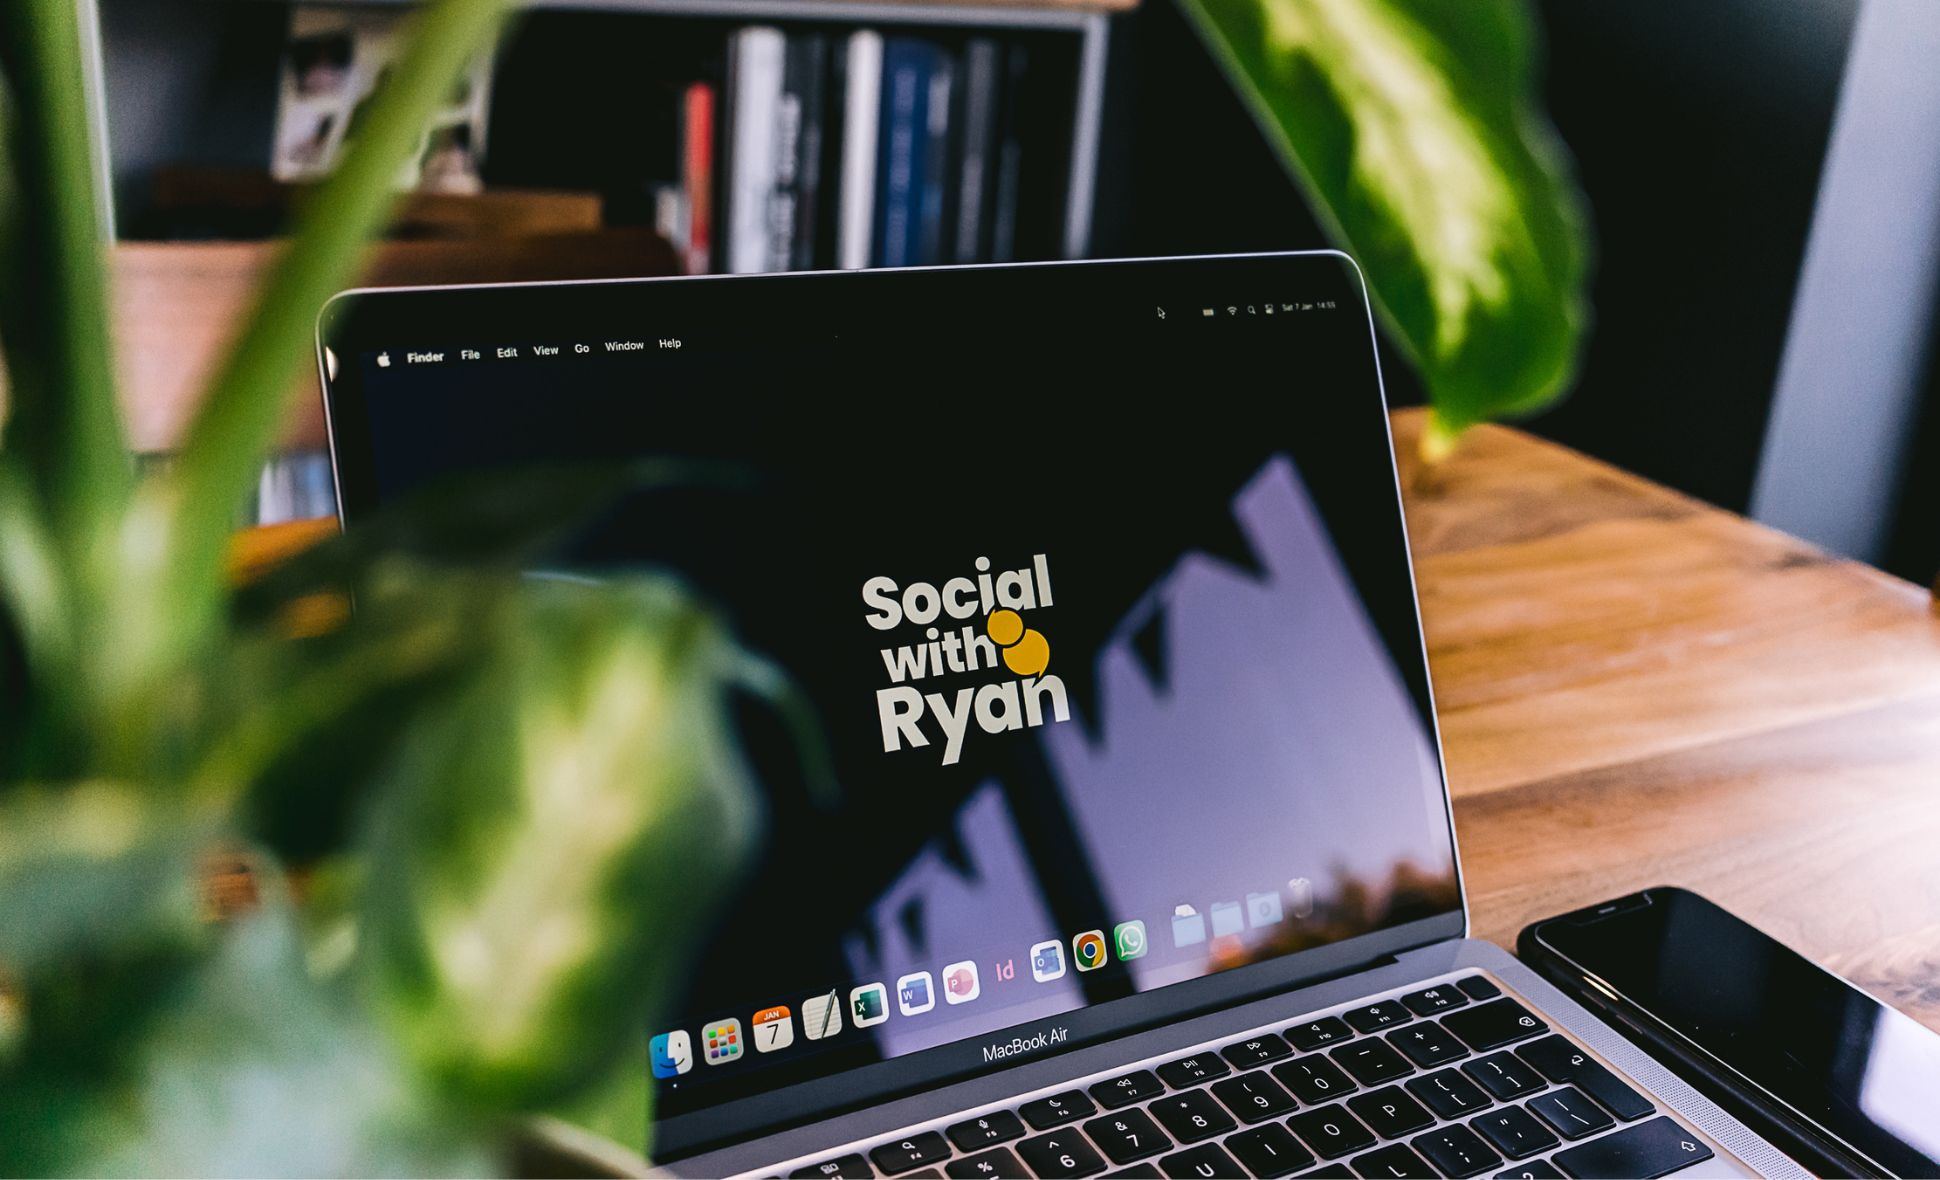 The picture shows my laptop screen with the Social with Ryan logo front and centre.